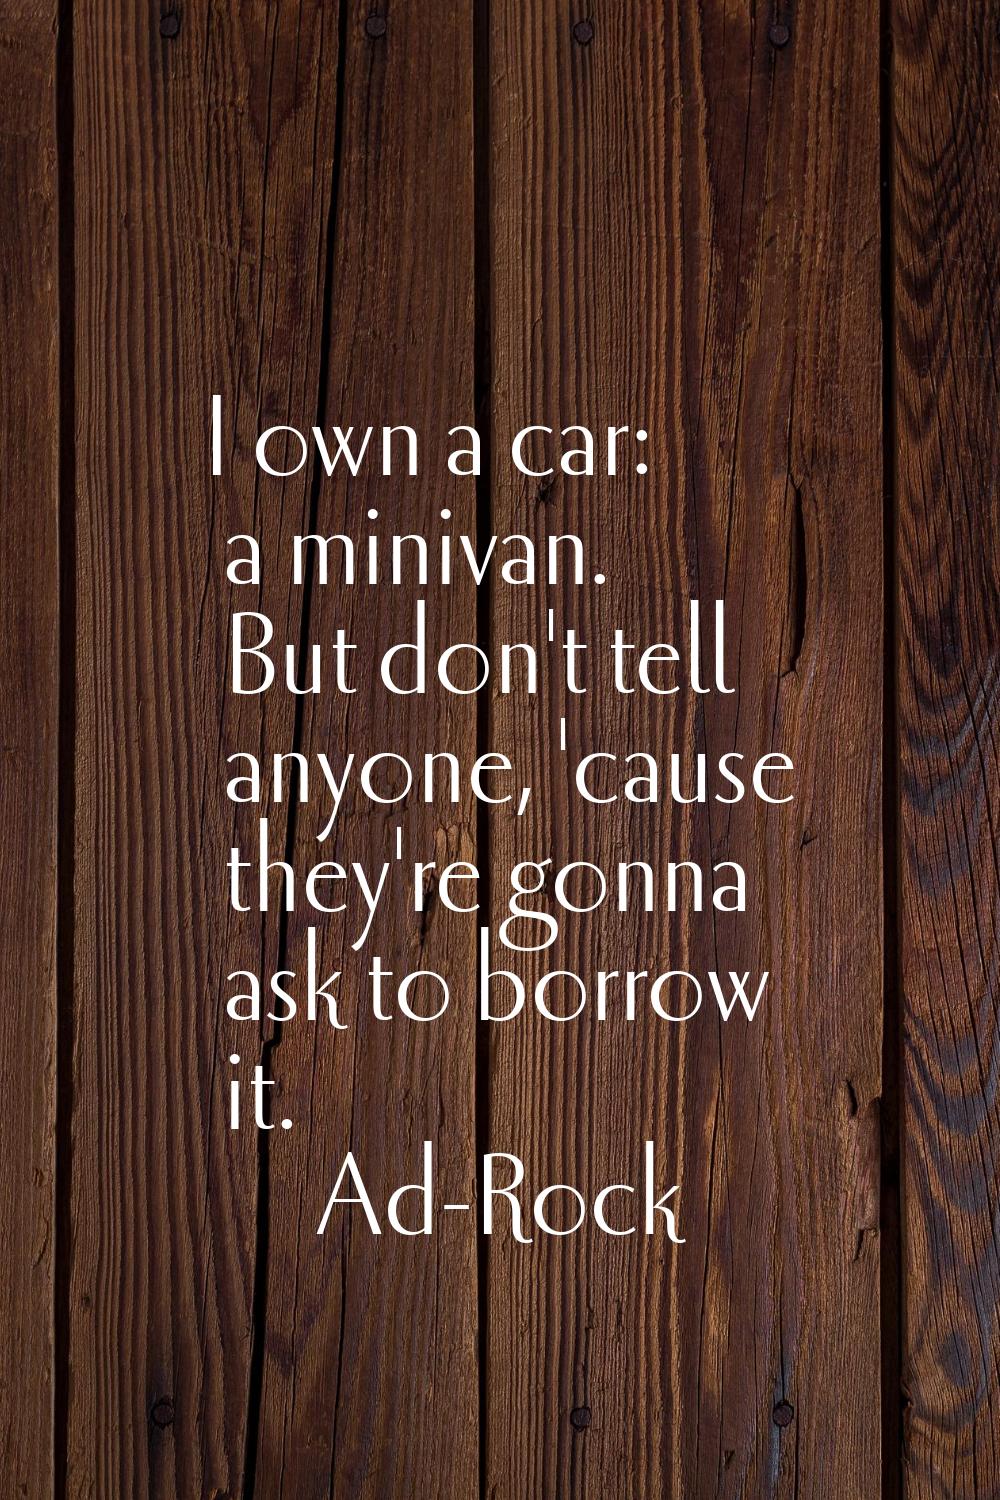 I own a car: a minivan. But don't tell anyone, 'cause they're gonna ask to borrow it.